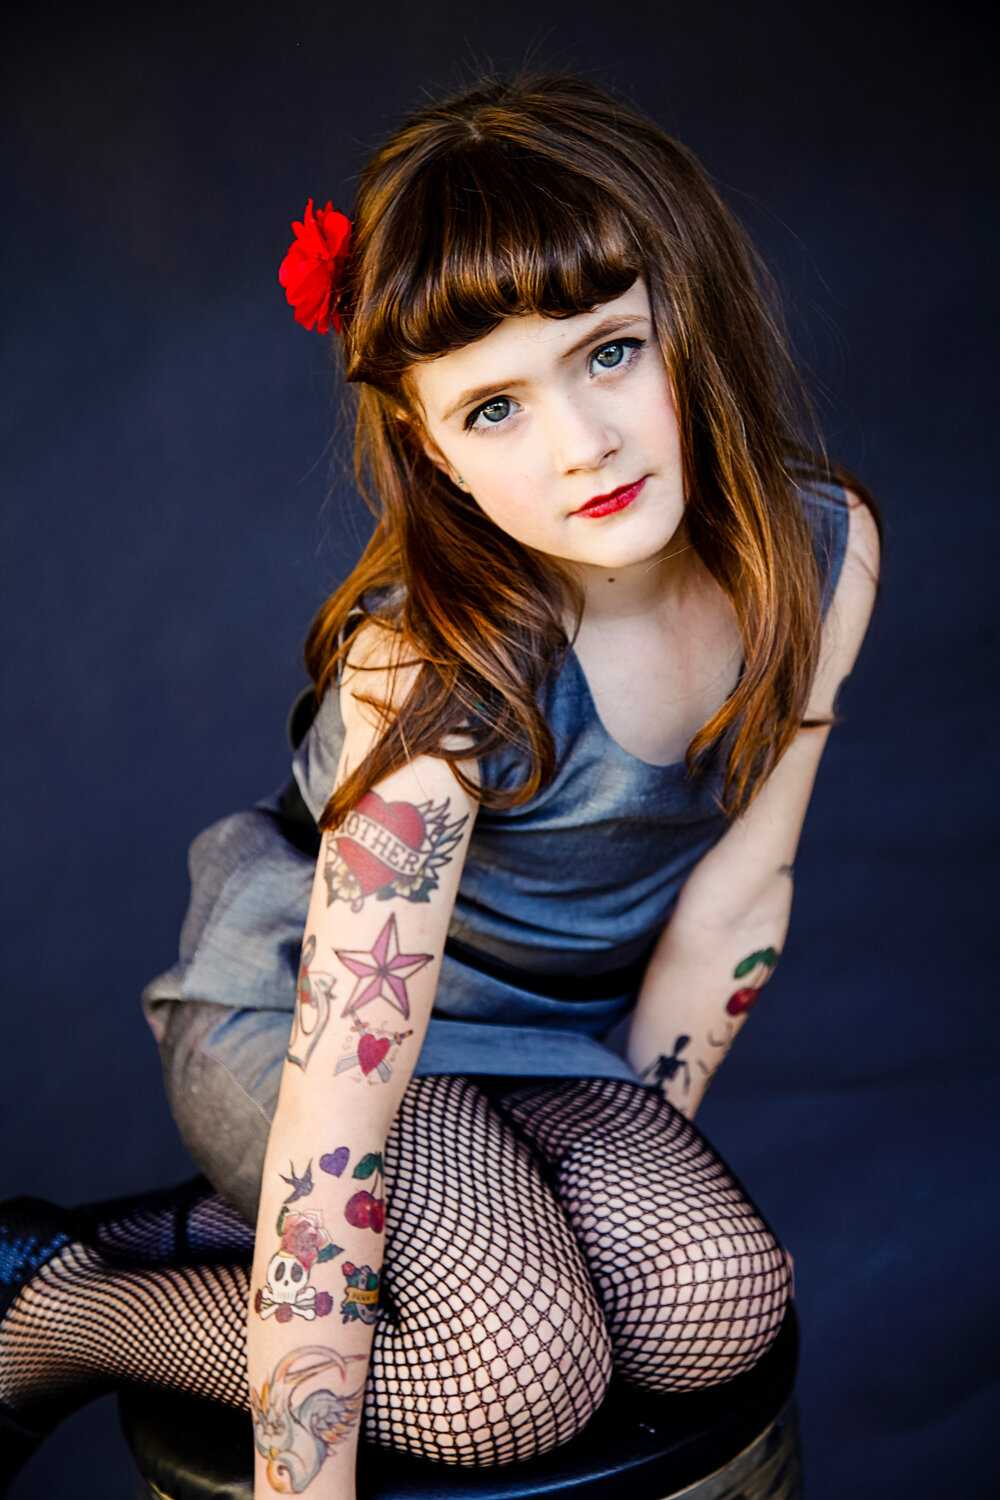 Kids with Tattoos